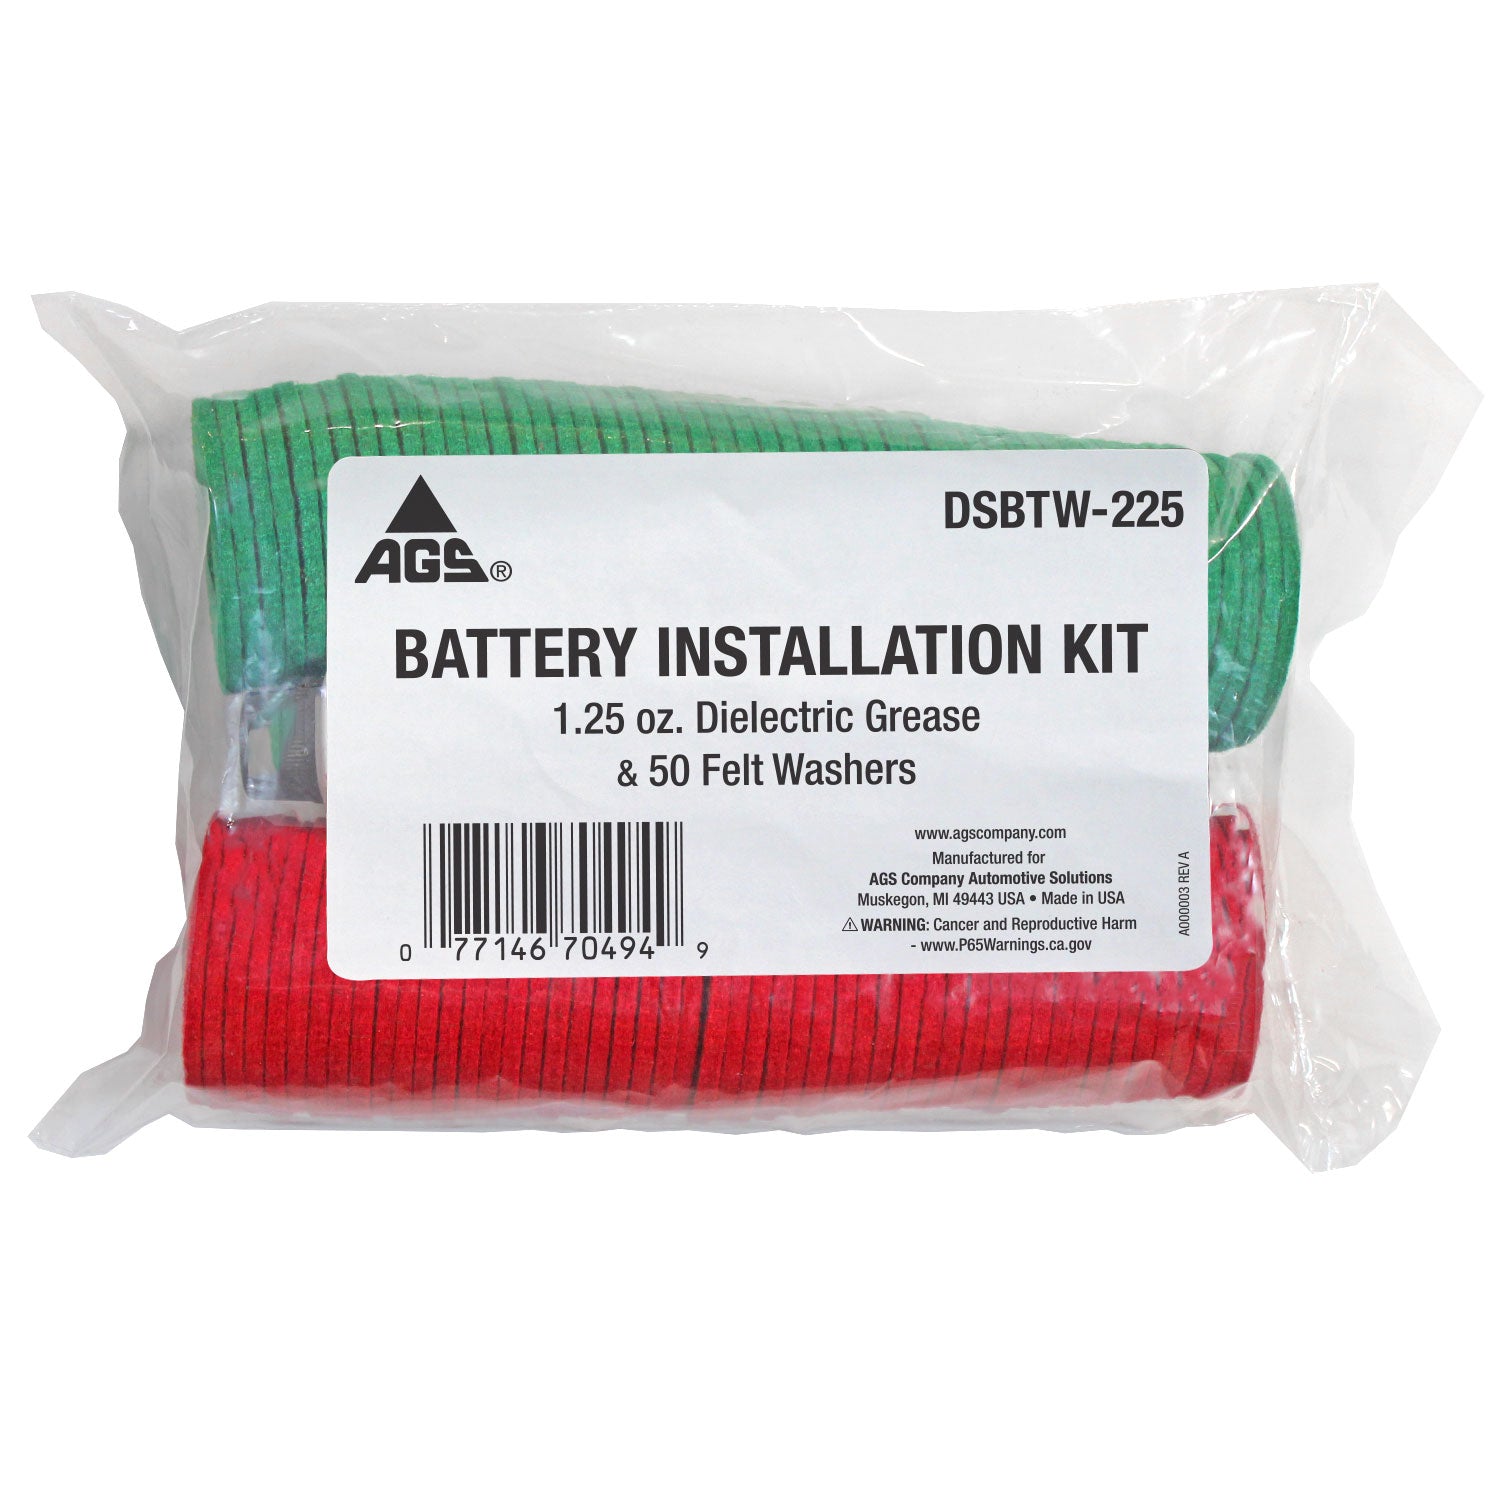 How to Install Battery Installation Kit - AGS Dielectric Grease